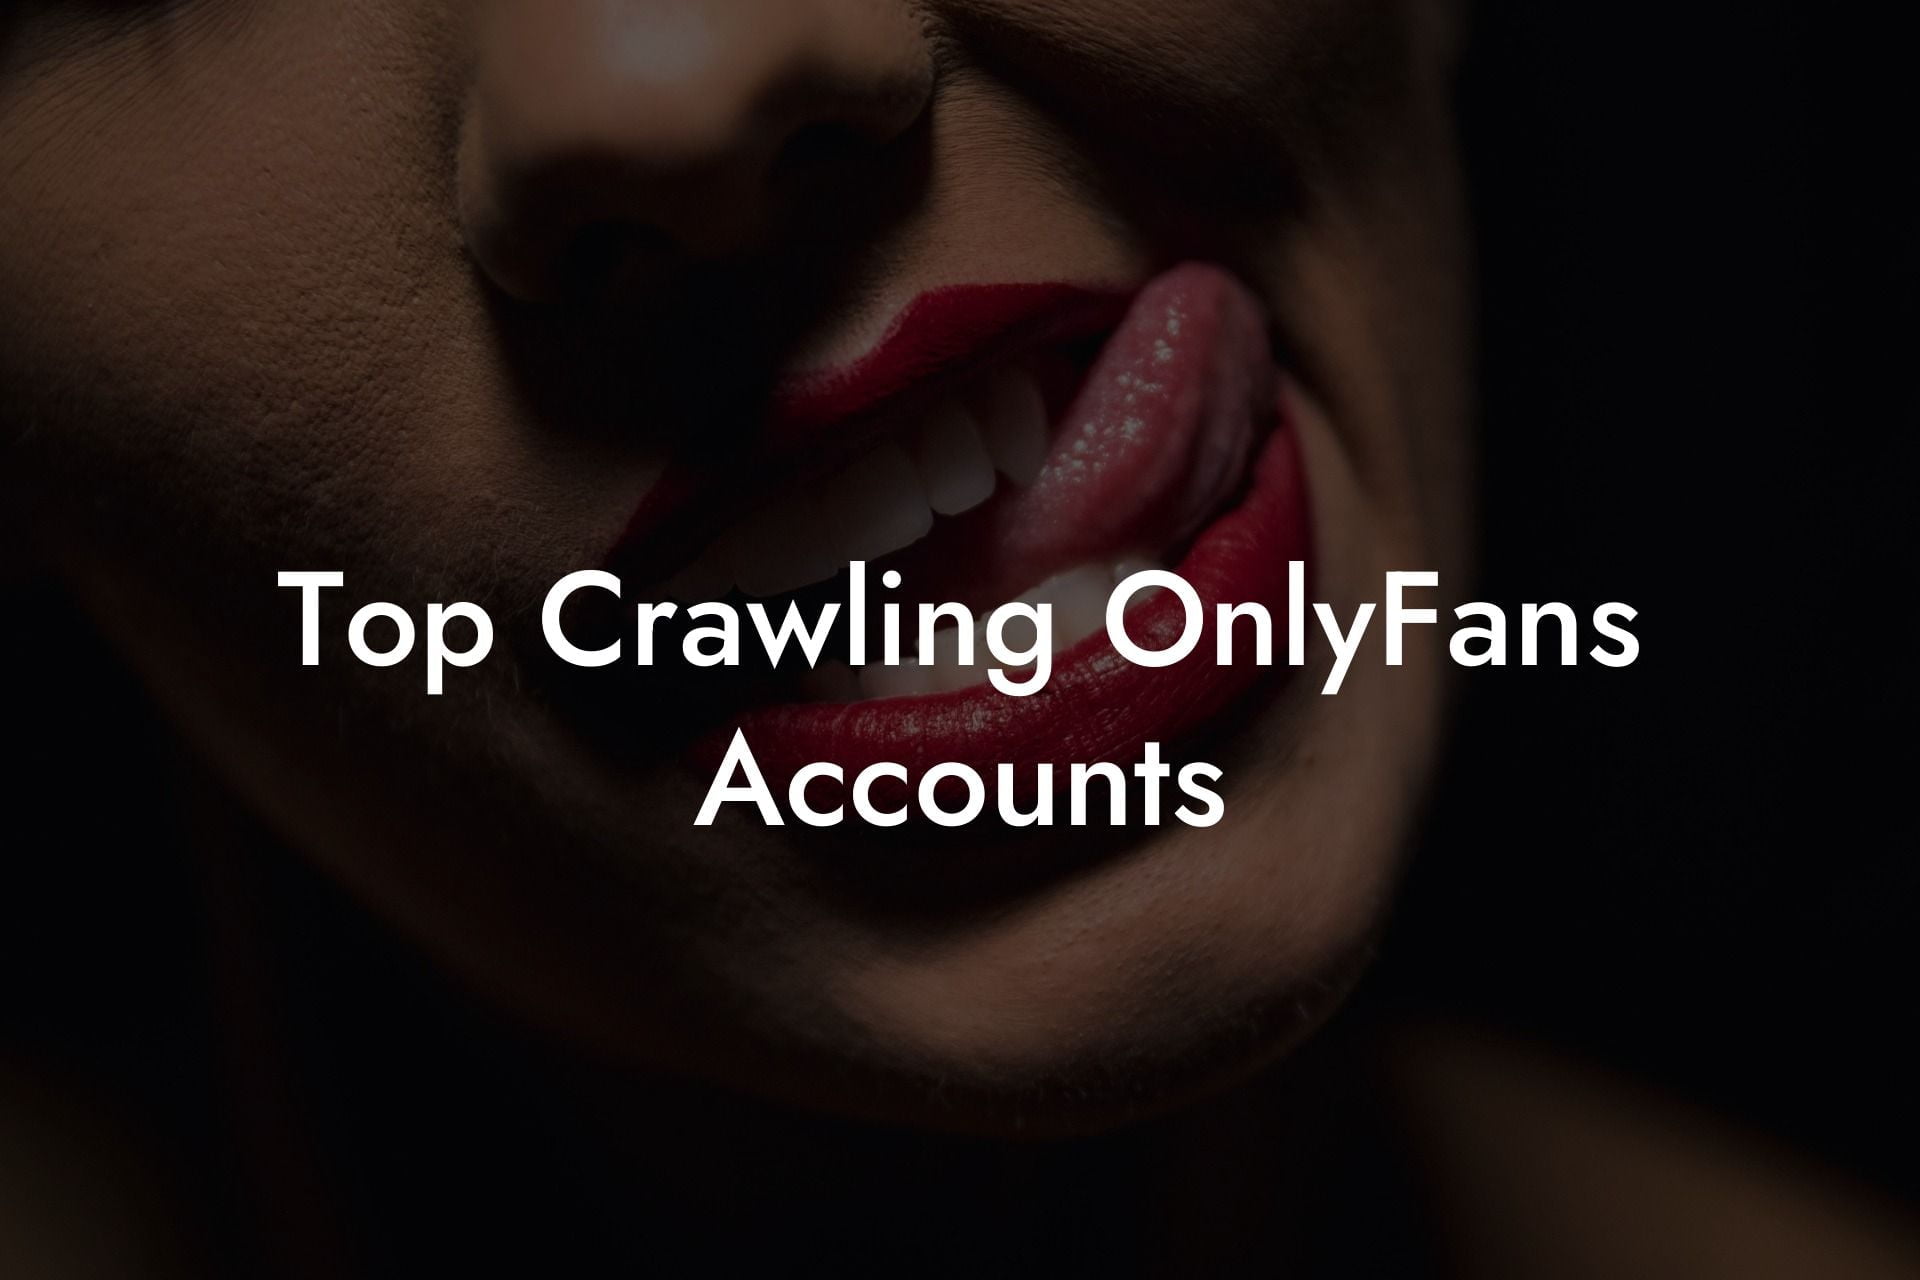 Top Crawling OnlyFans Accounts